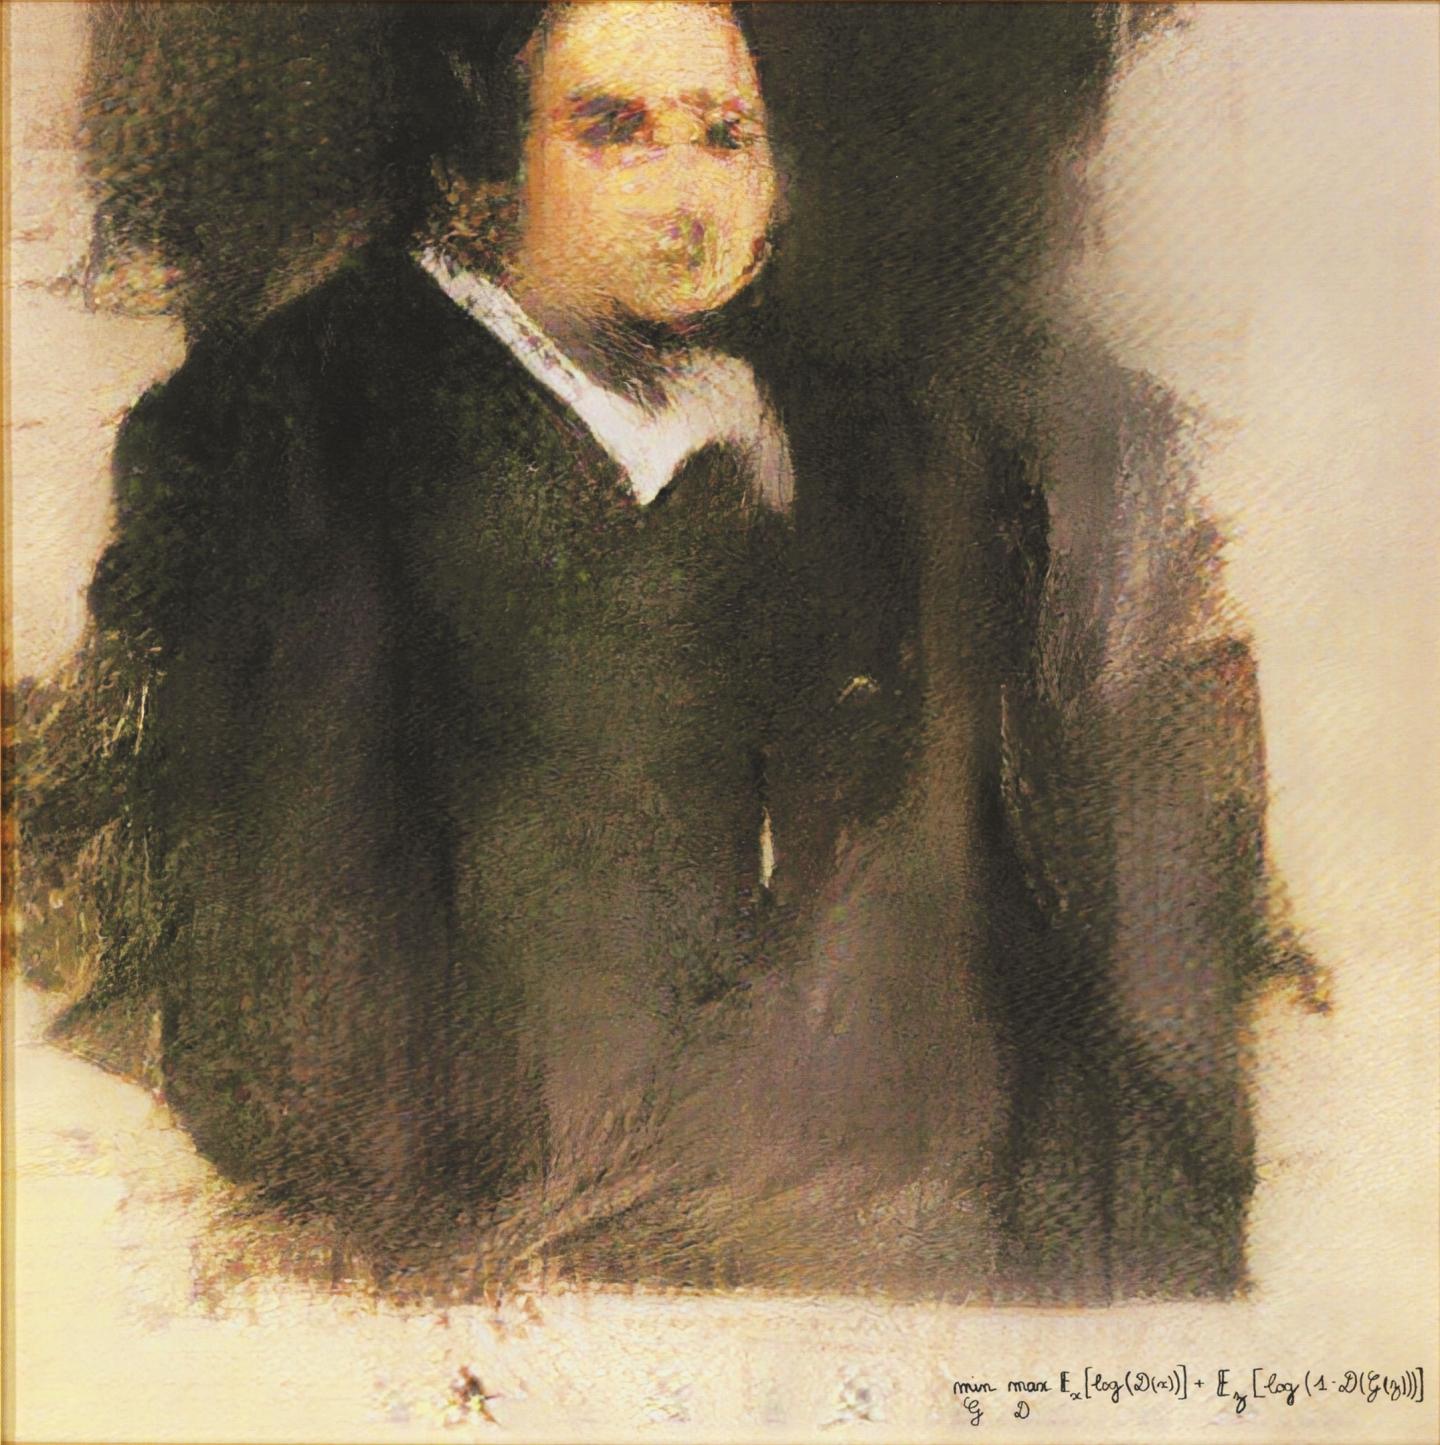 In October 2018, a work of art by Edmond de Belamie, which was created with the help of an intelligent algorithm, was auctioned for 432,500 USD at Christie's Auction House. Source: Obvious (collective)